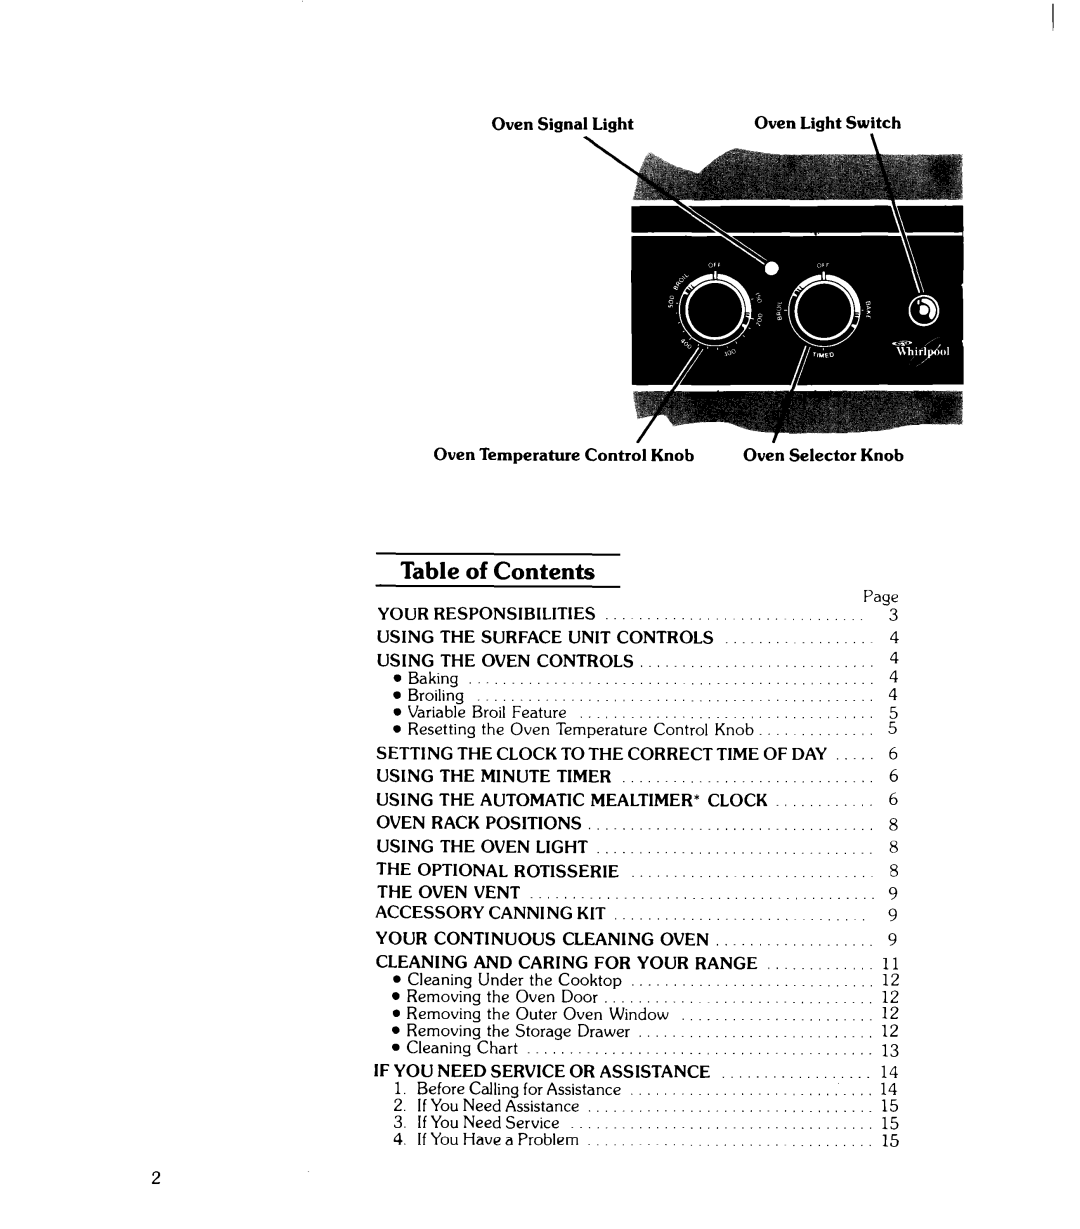 Whirlpool RJE-3365 manual of Contents 